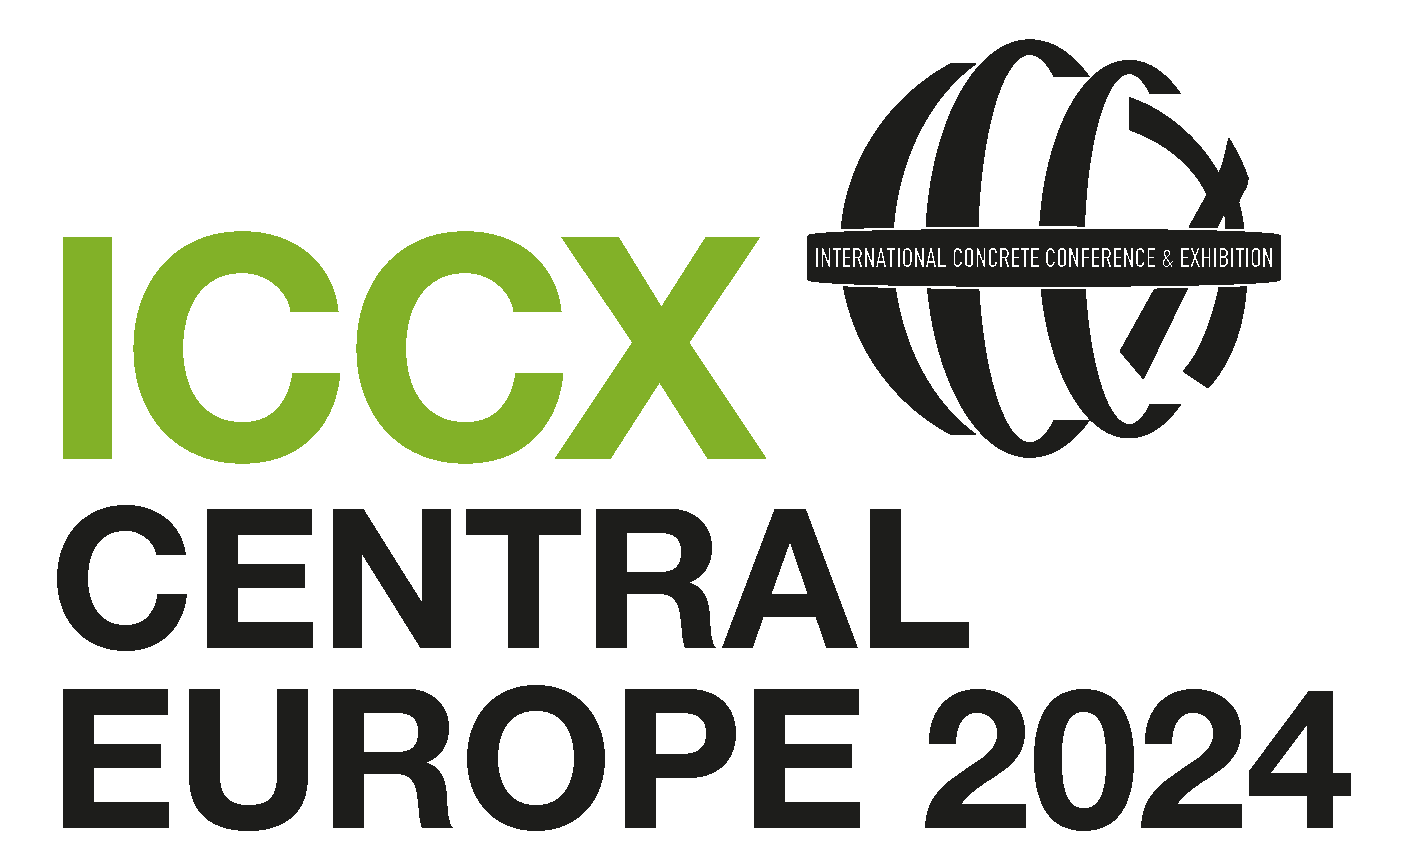 ICCX CENTRAL EUROPE 2024